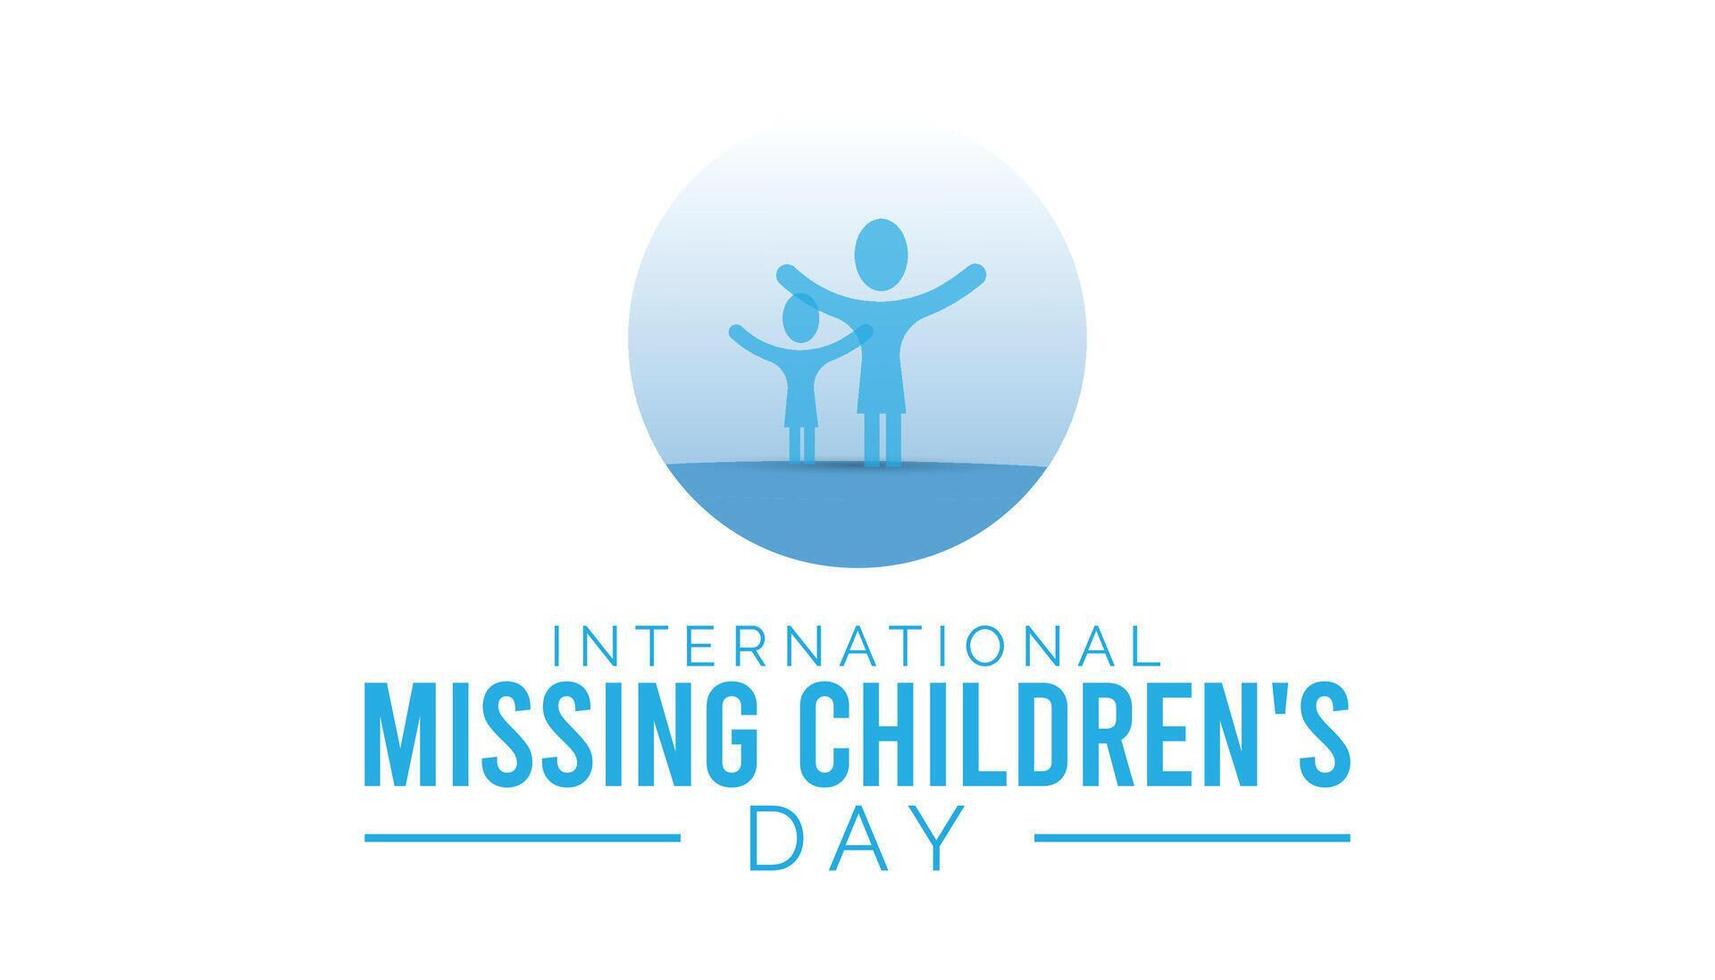 International Missing Children's Day observed every year in May 25. Template for background, banner, card, poster with text inscription. vector